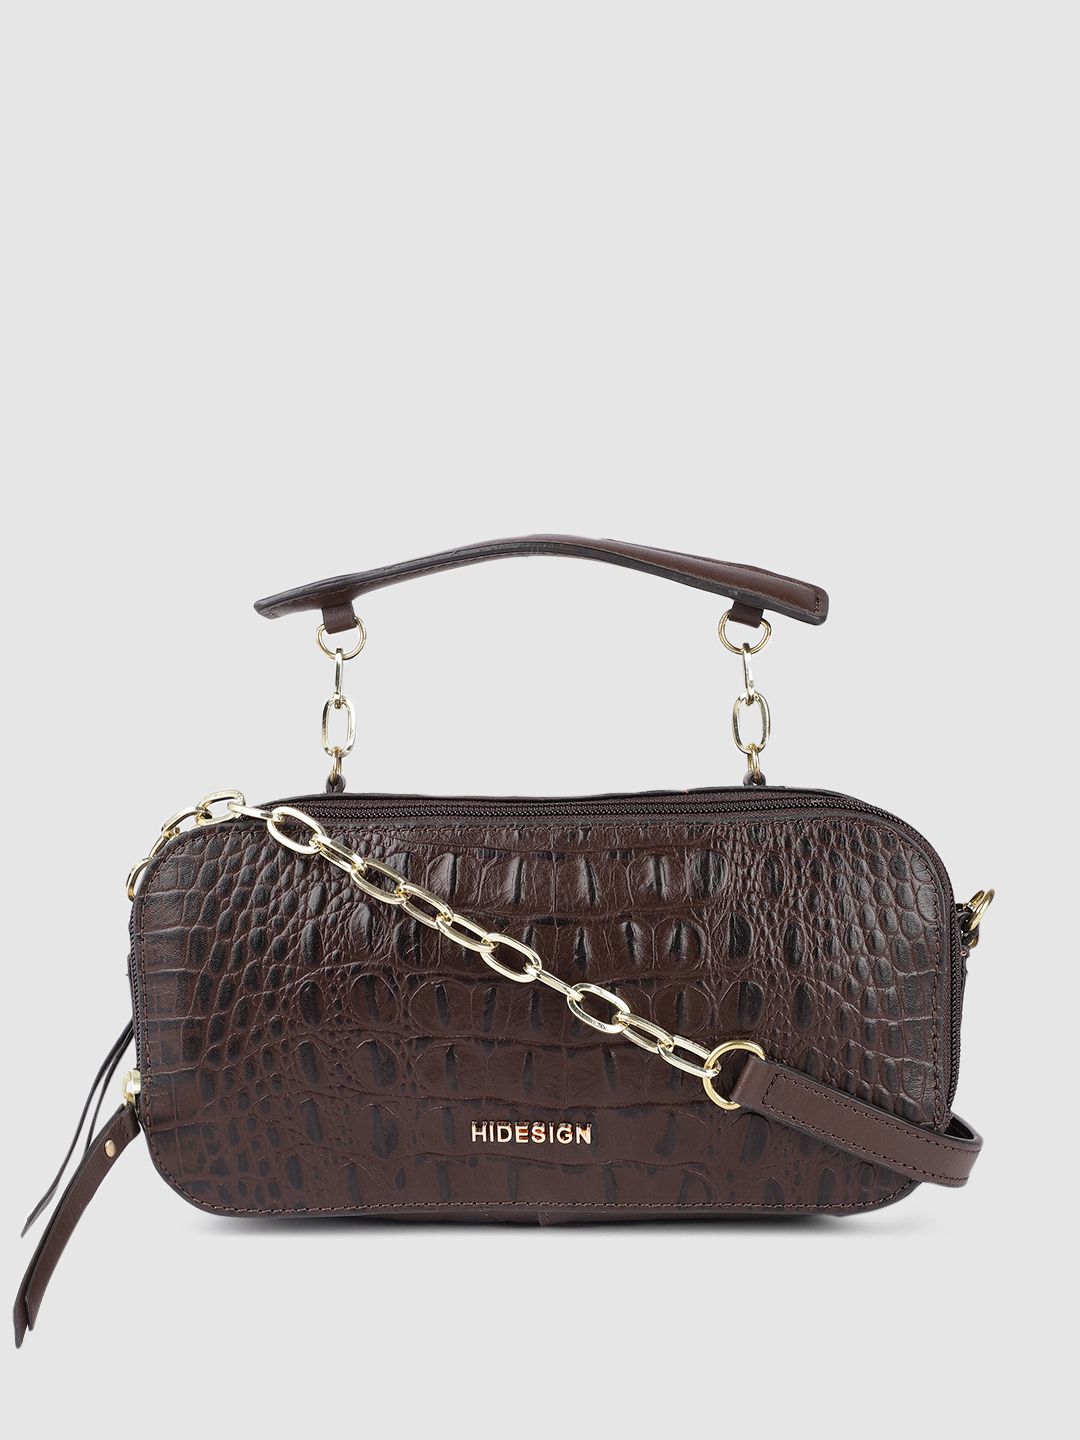 Hidesign Women Brown Textured Leather Sling Bag Price in India